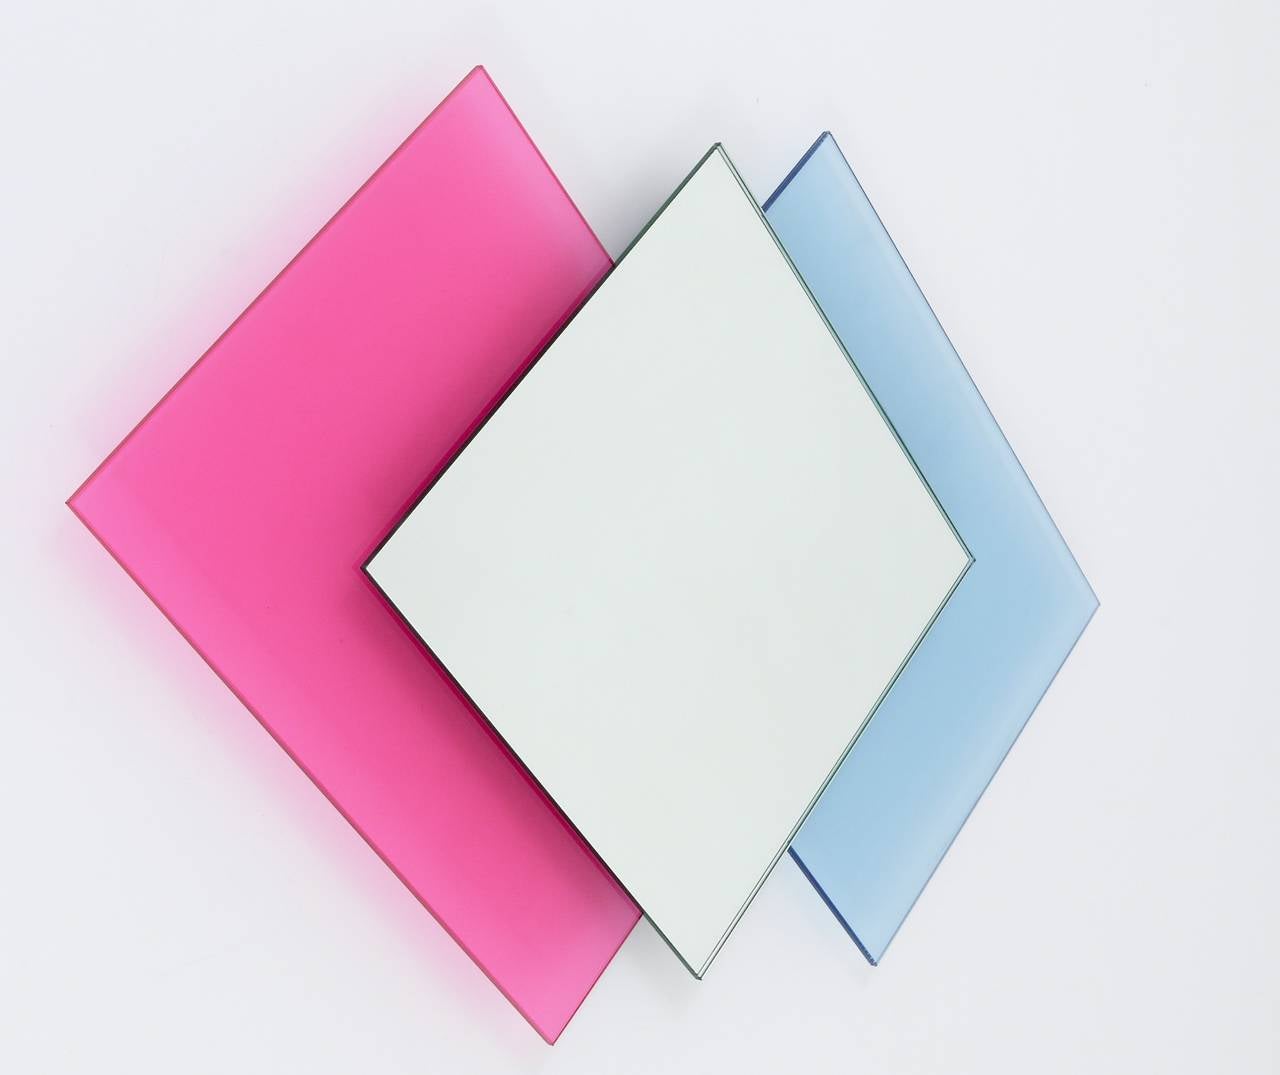 Mid-Century Modern Pair of Colorful Crystal Glass Wall Mirrors, Ettore Sottsass Style, Italy, 1980s